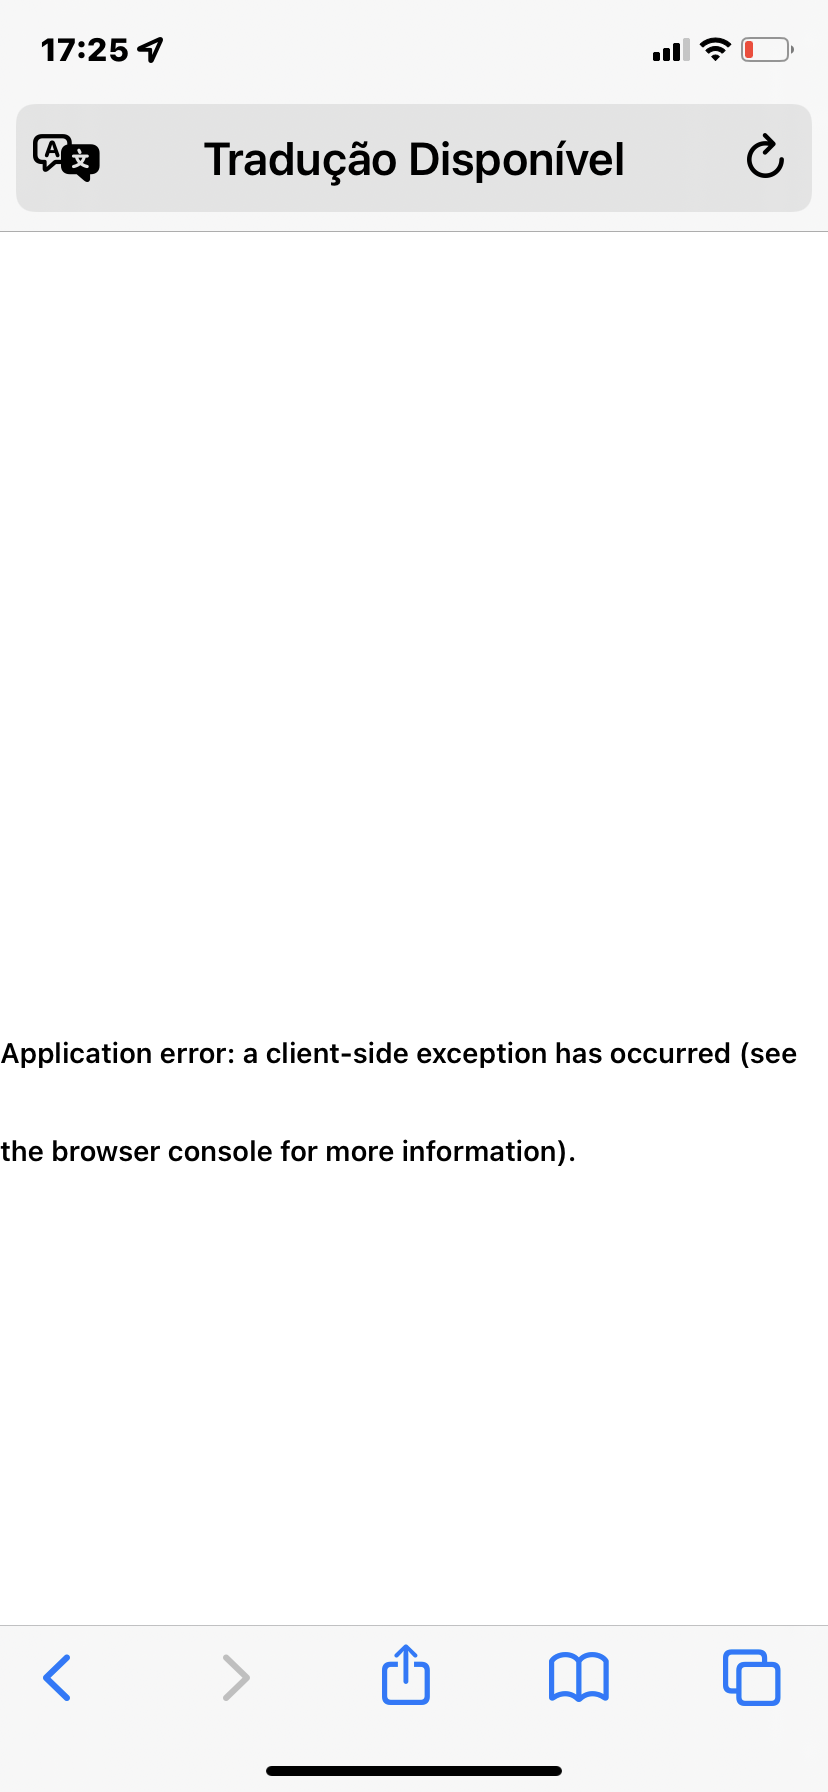 Application error: a client-side exception has occurred